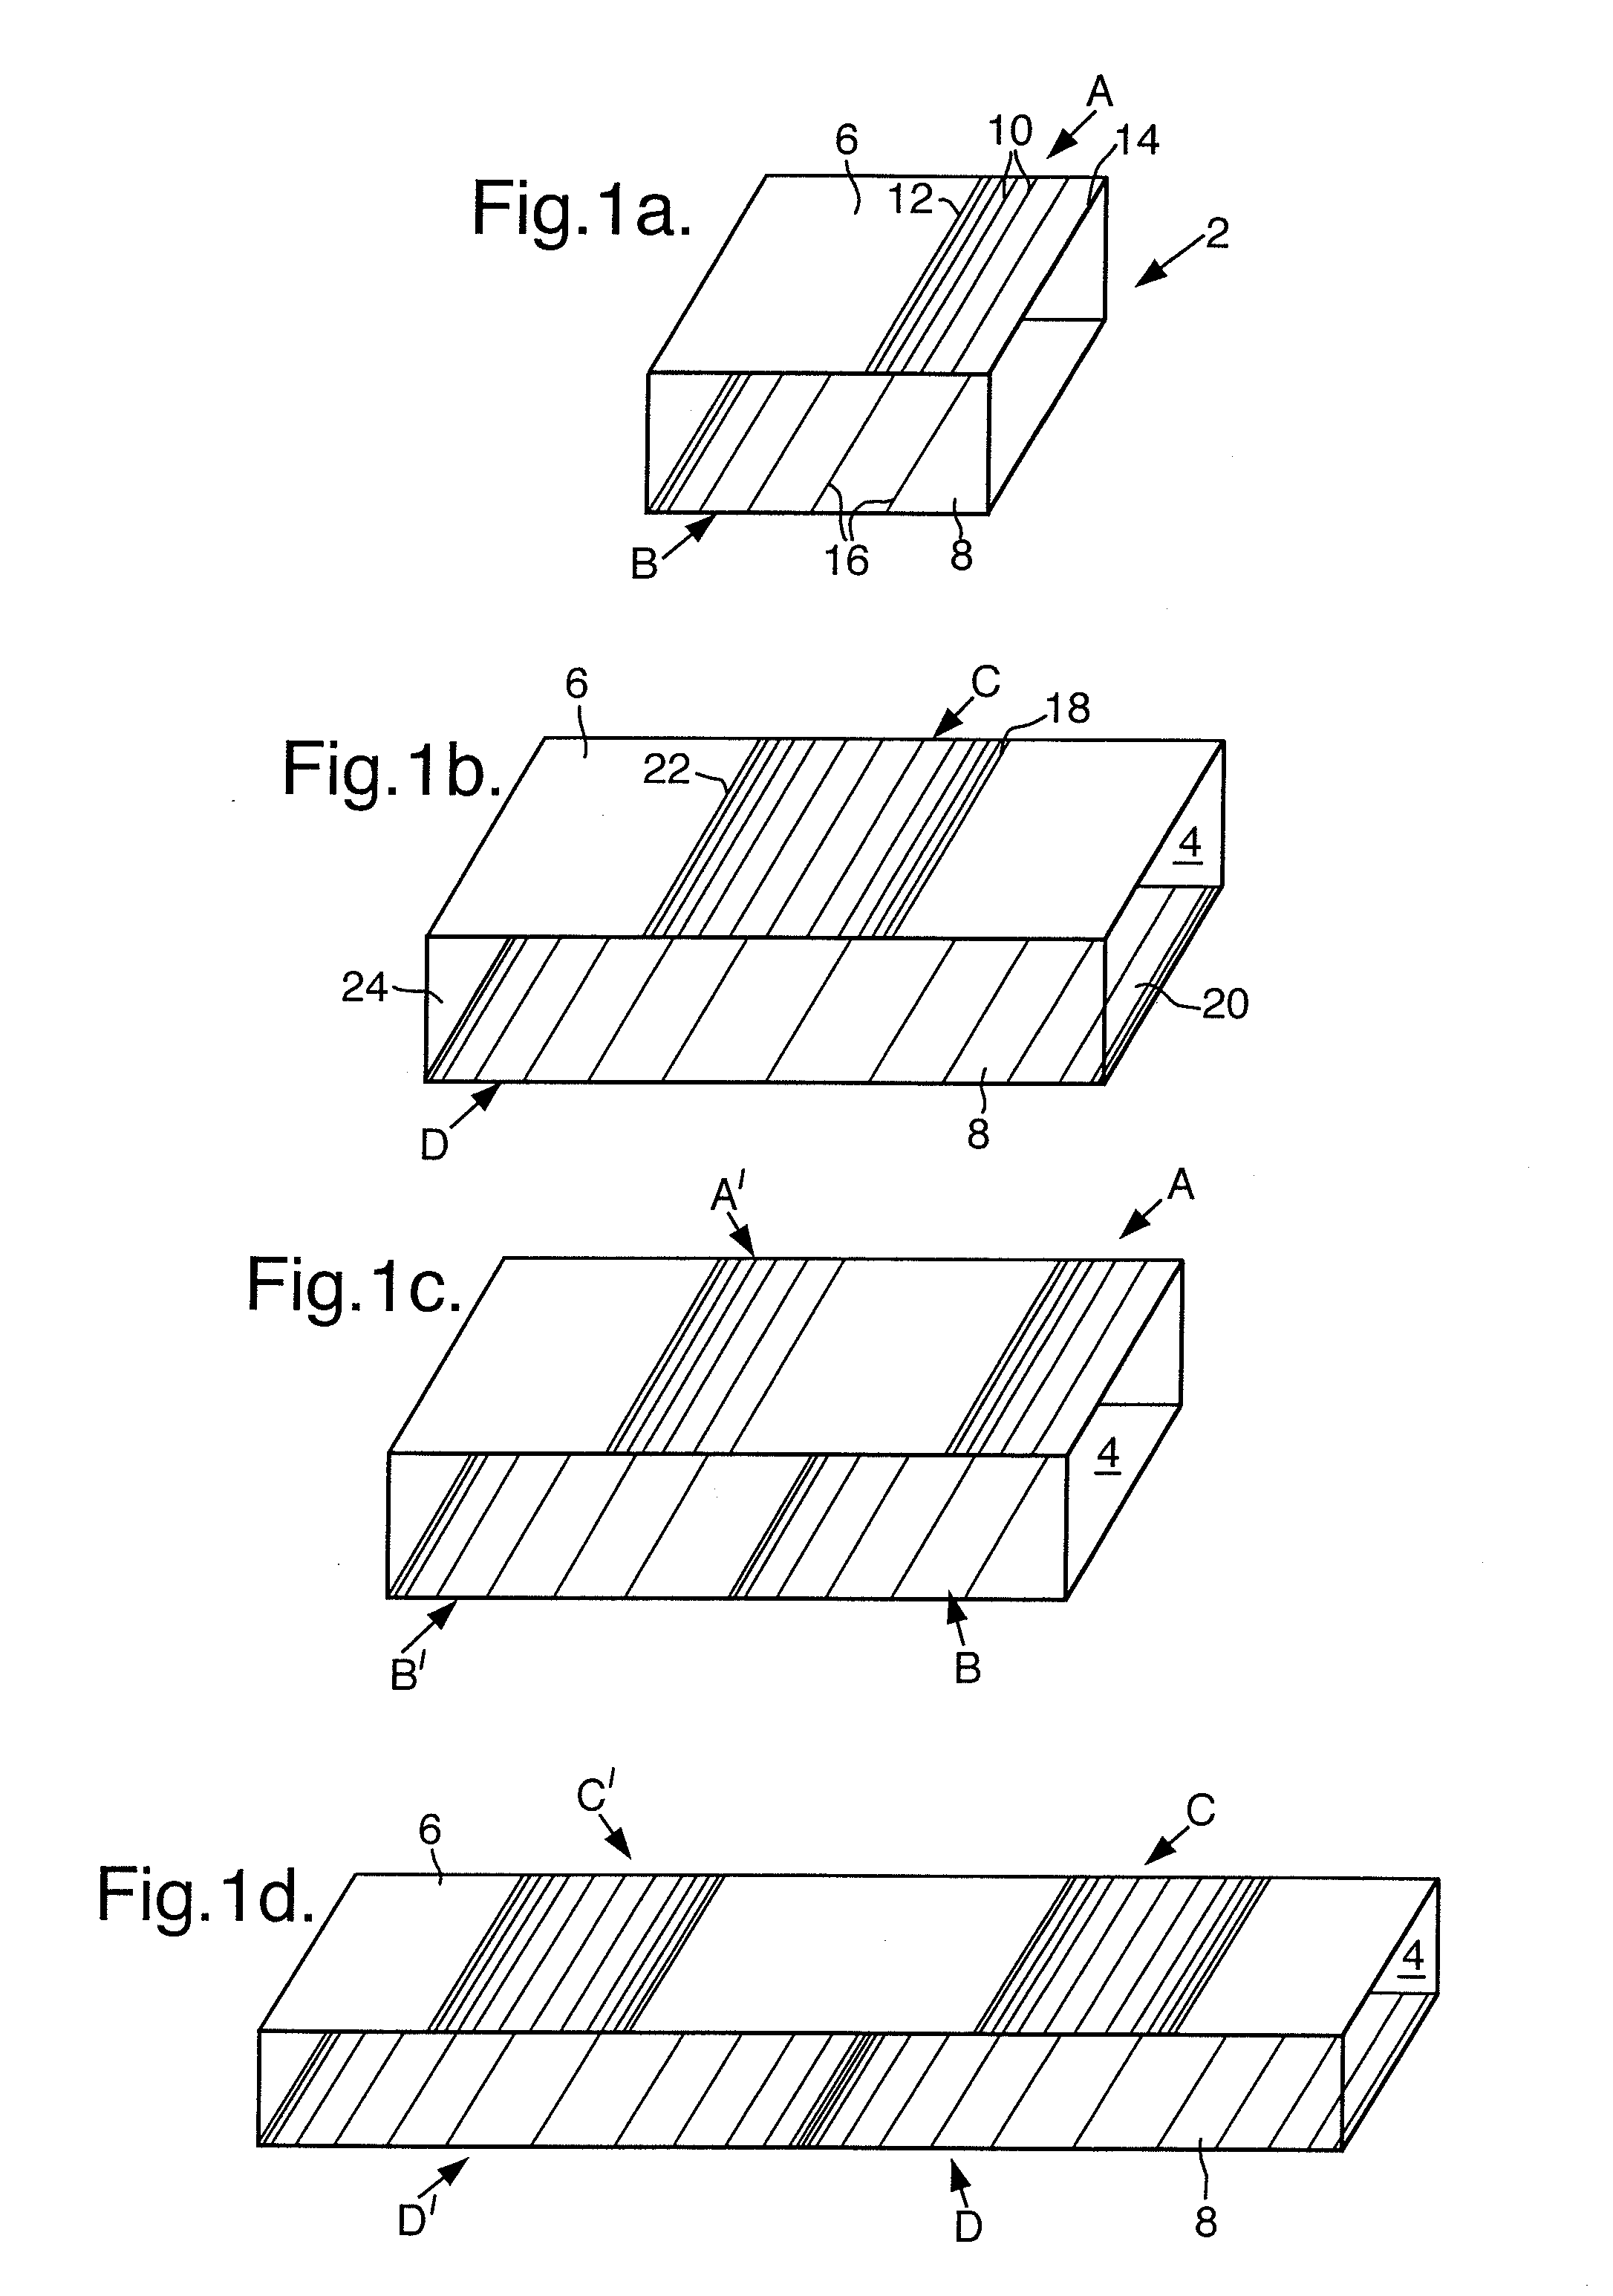 Dynamic optical devices